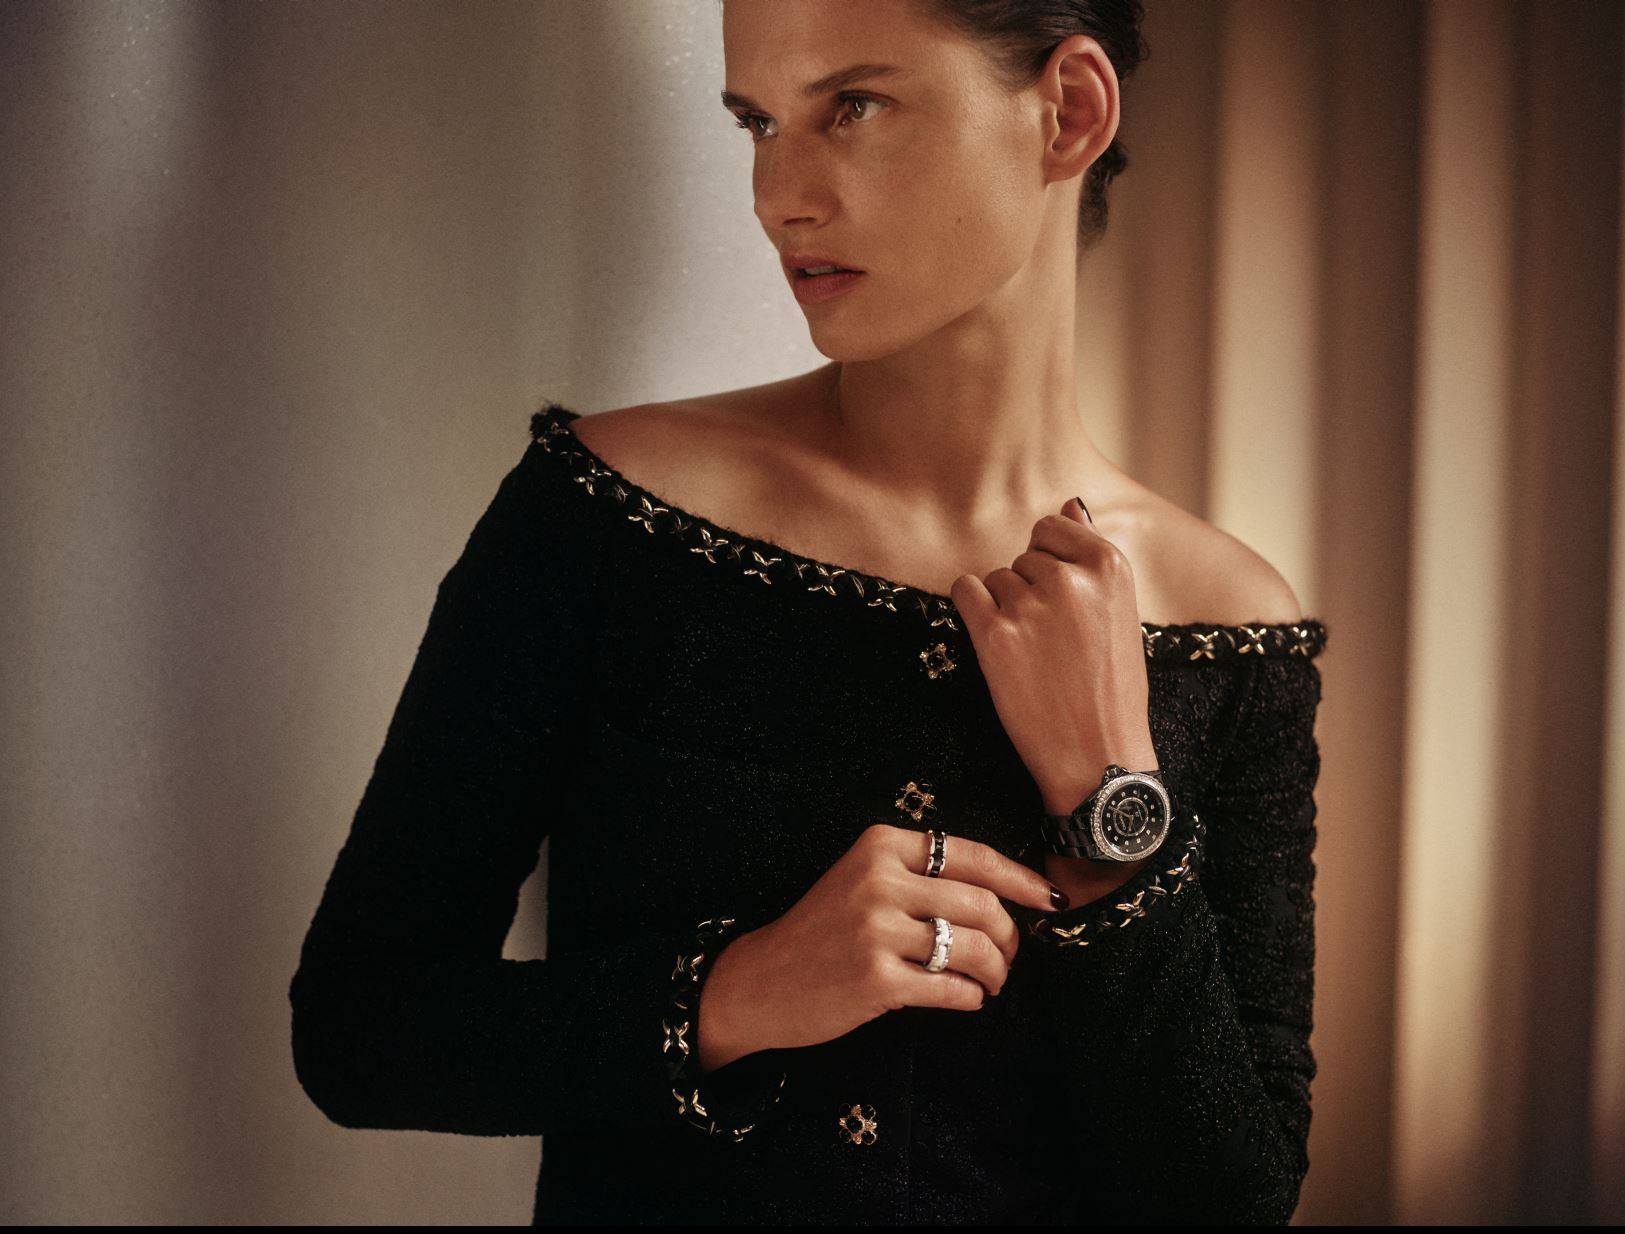 Is the Chanel J12 the watch for you? From aesthetics, size and lifestyle fit, to complications, function and budget, here’s how to begin your search for the ideal timepiece. Photo: Chanel